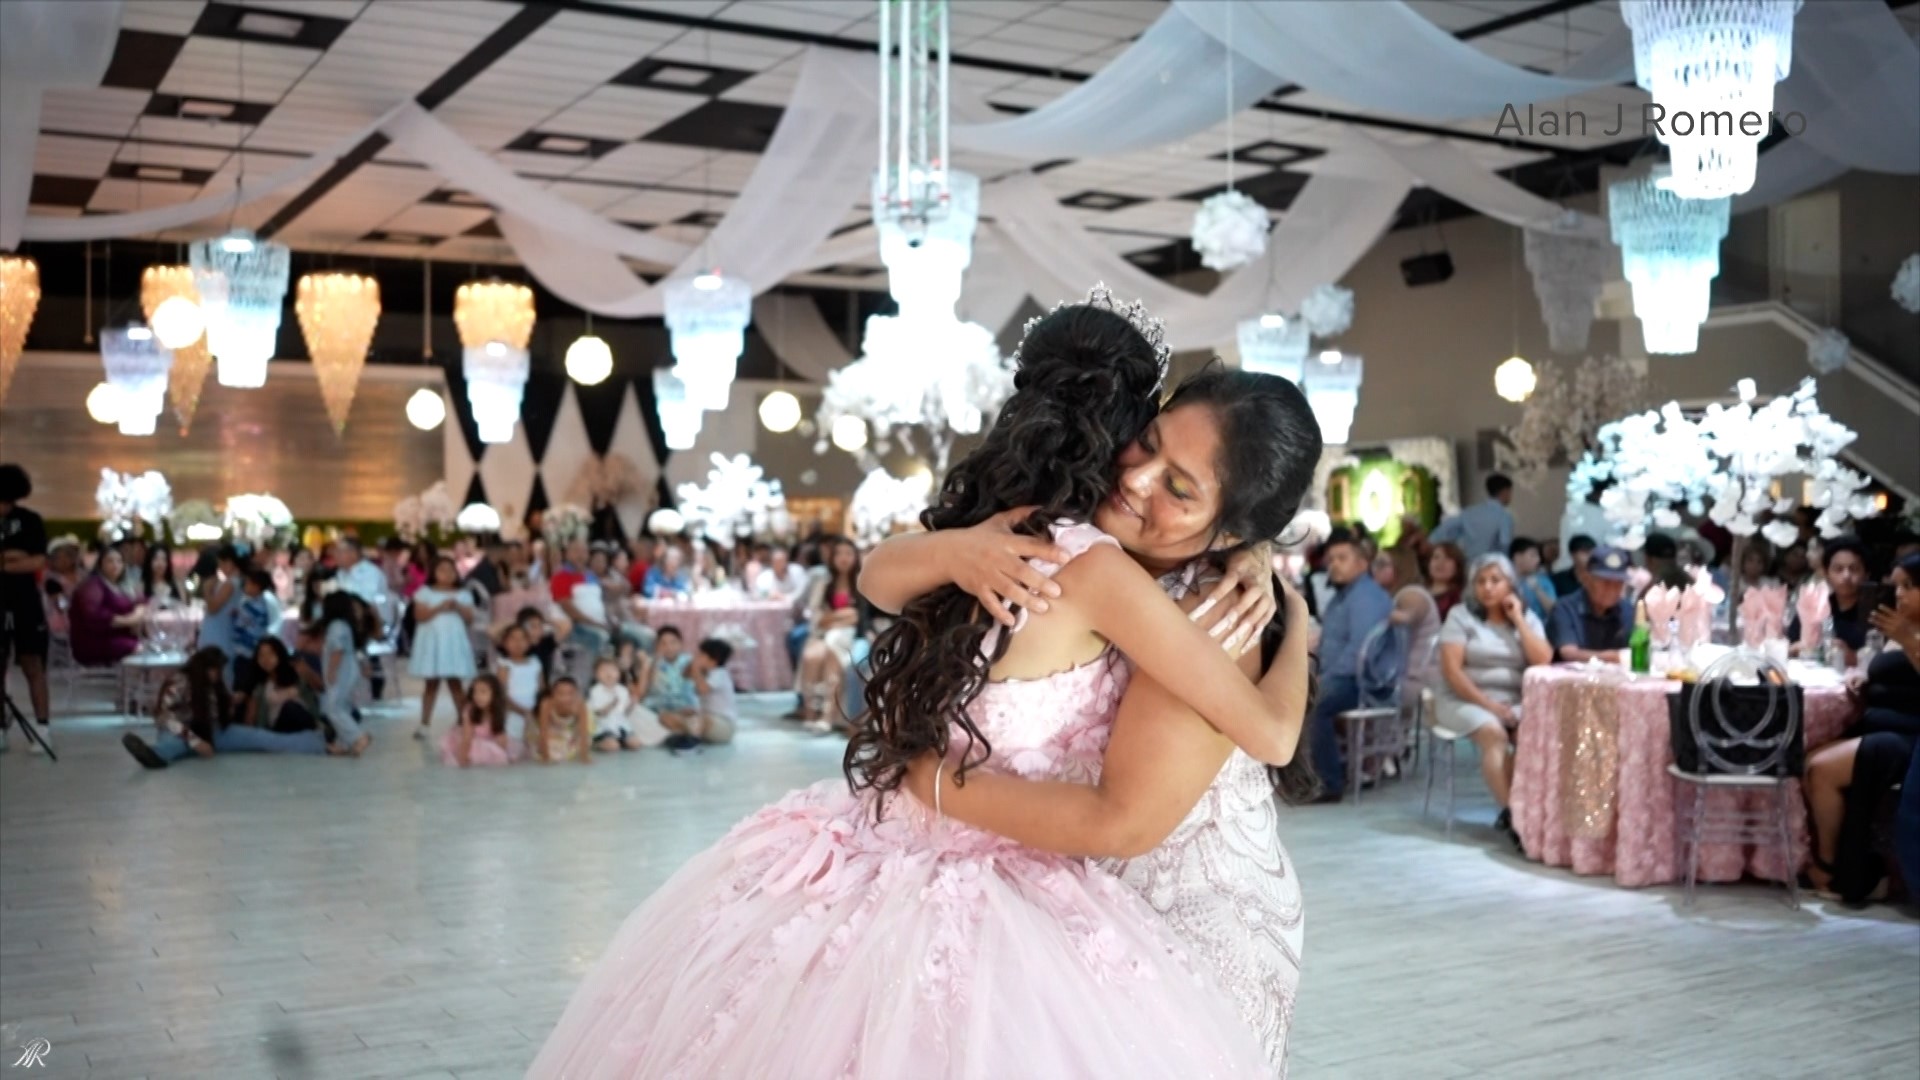 Quinceañeras mark the transition of a girl into a woman with a celebration.